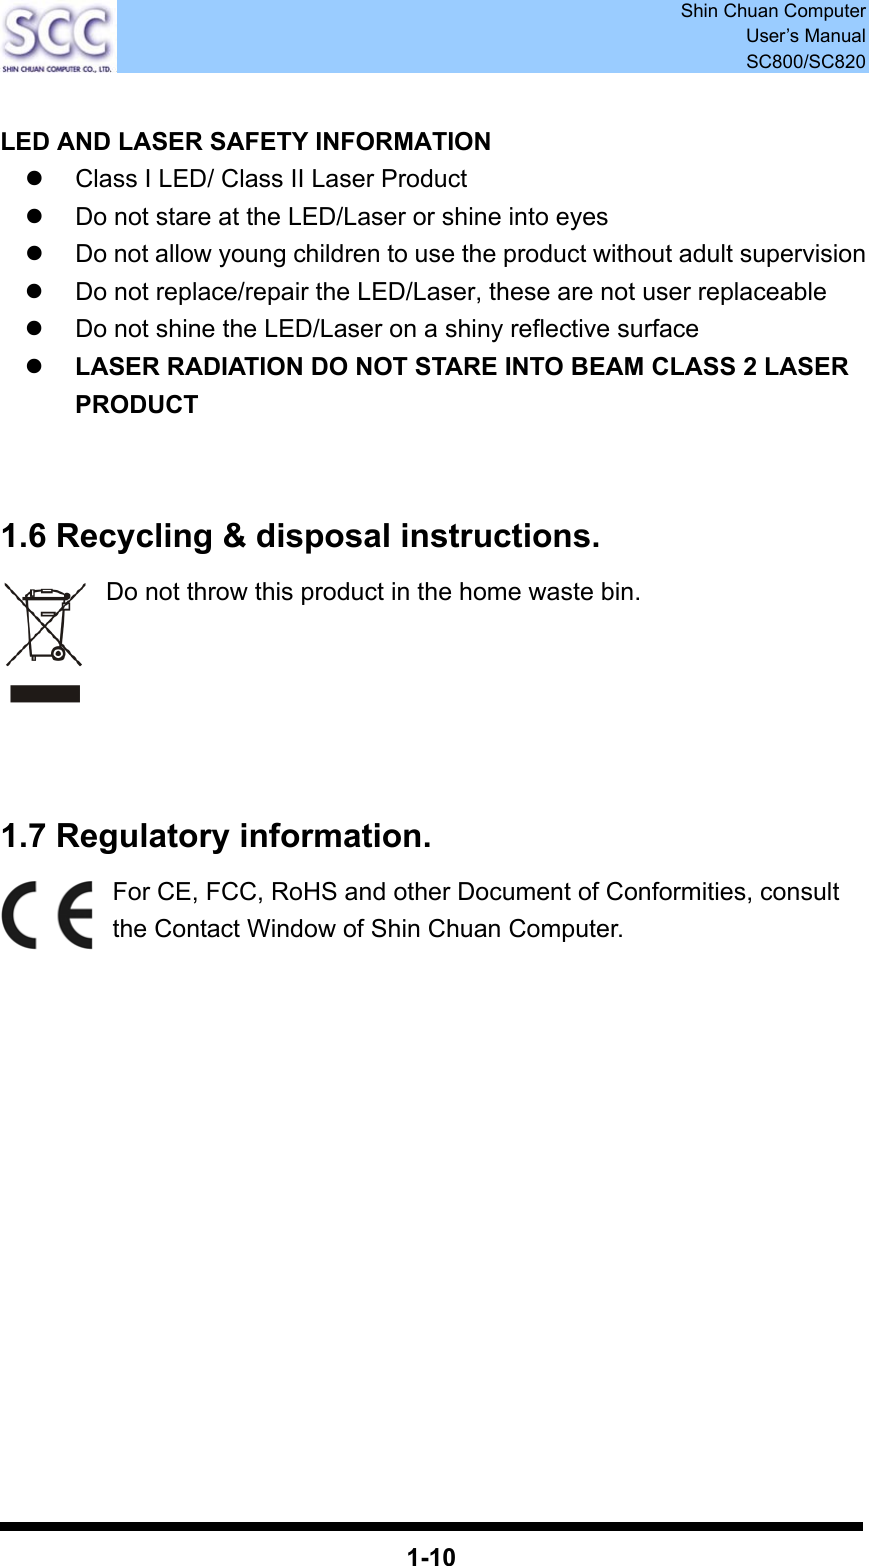  Shin Chuan Computer User’s Manual SC800/SC820  1-10  LED AND LASER SAFETY INFORMATION z  Class I LED/ Class II Laser Product z  Do not stare at the LED/Laser or shine into eyes z  Do not allow young children to use the product without adult supervision z  Do not replace/repair the LED/Laser, these are not user replaceable z  Do not shine the LED/Laser on a shiny reflective surface z LASER RADIATION DO NOT STARE INTO BEAM CLASS 2 LASER PRODUCT   1.6 Recycling &amp; disposal instructions. Do not throw this product in the home waste bin.        1.7 Regulatory information. For CE, FCC, RoHS and other Document of Conformities, consult the Contact Window of Shin Chuan Computer.               